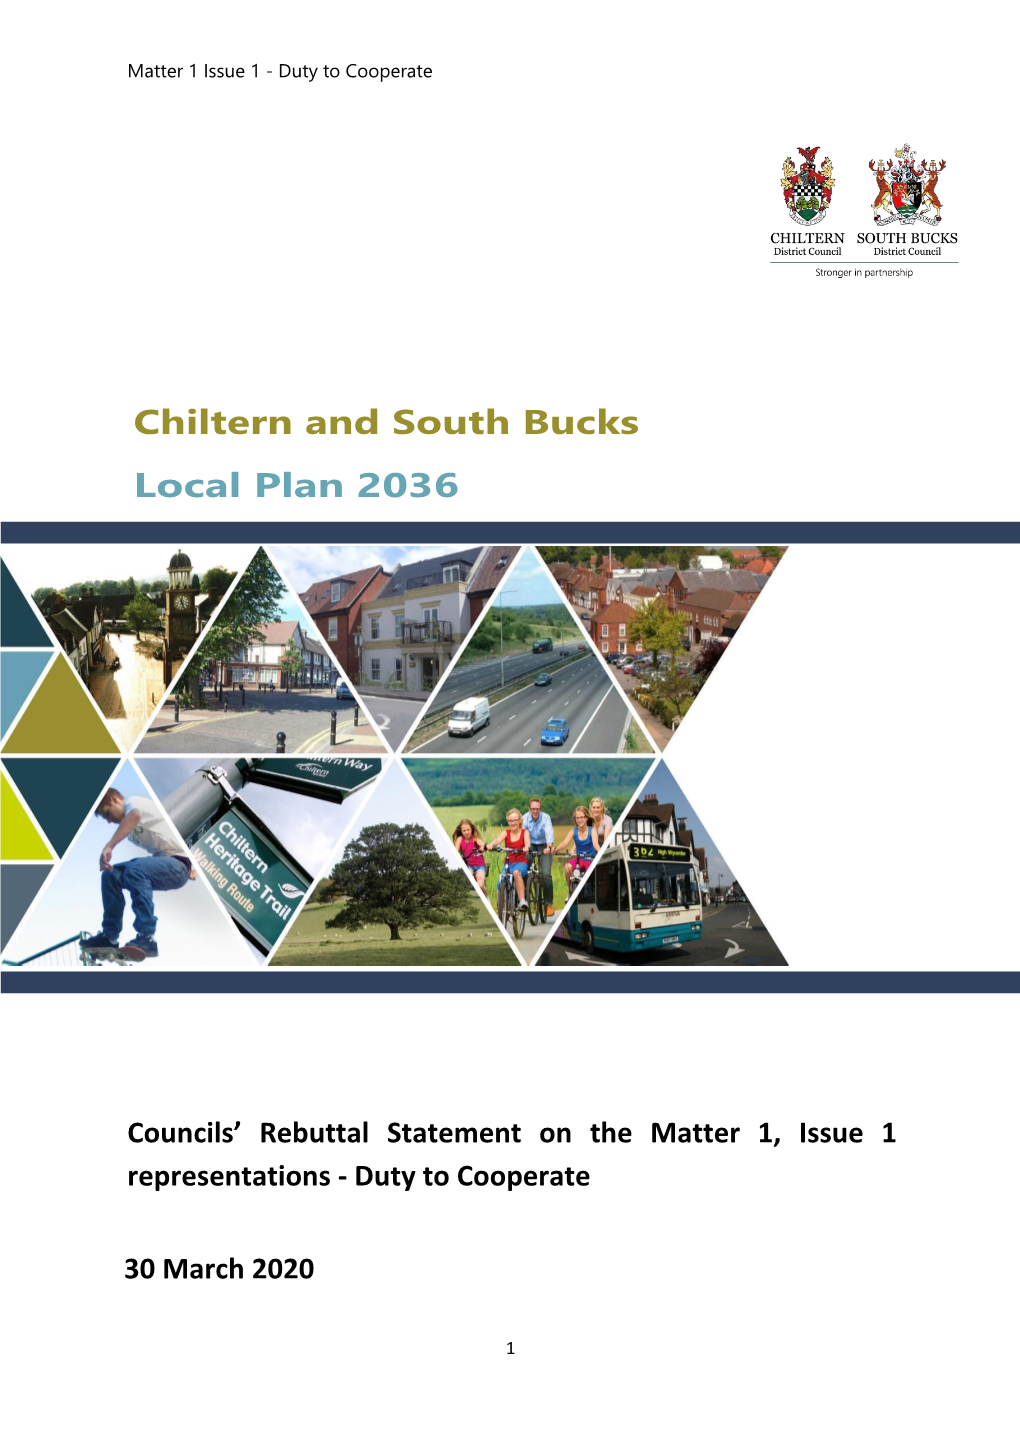 Chiltern and South Bucks Local Plan 2036